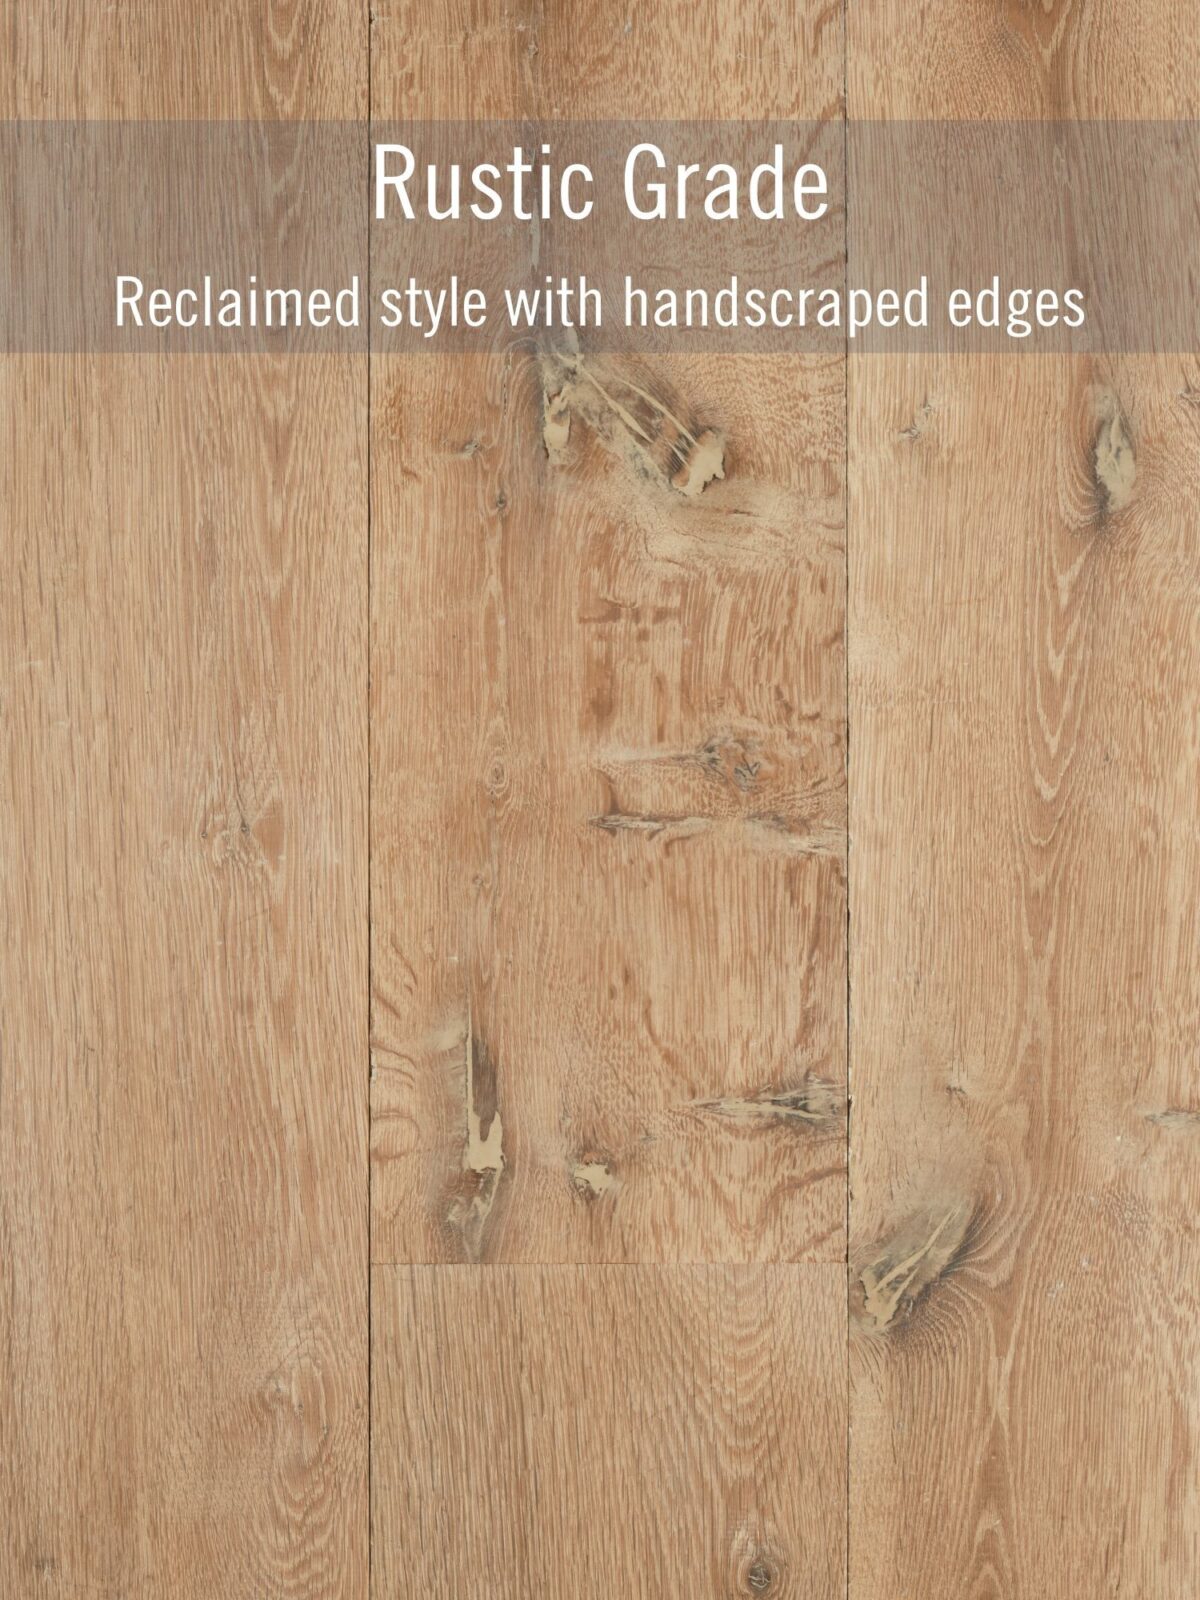 rustic grade flooring - reclaimed style with hand scraped edges